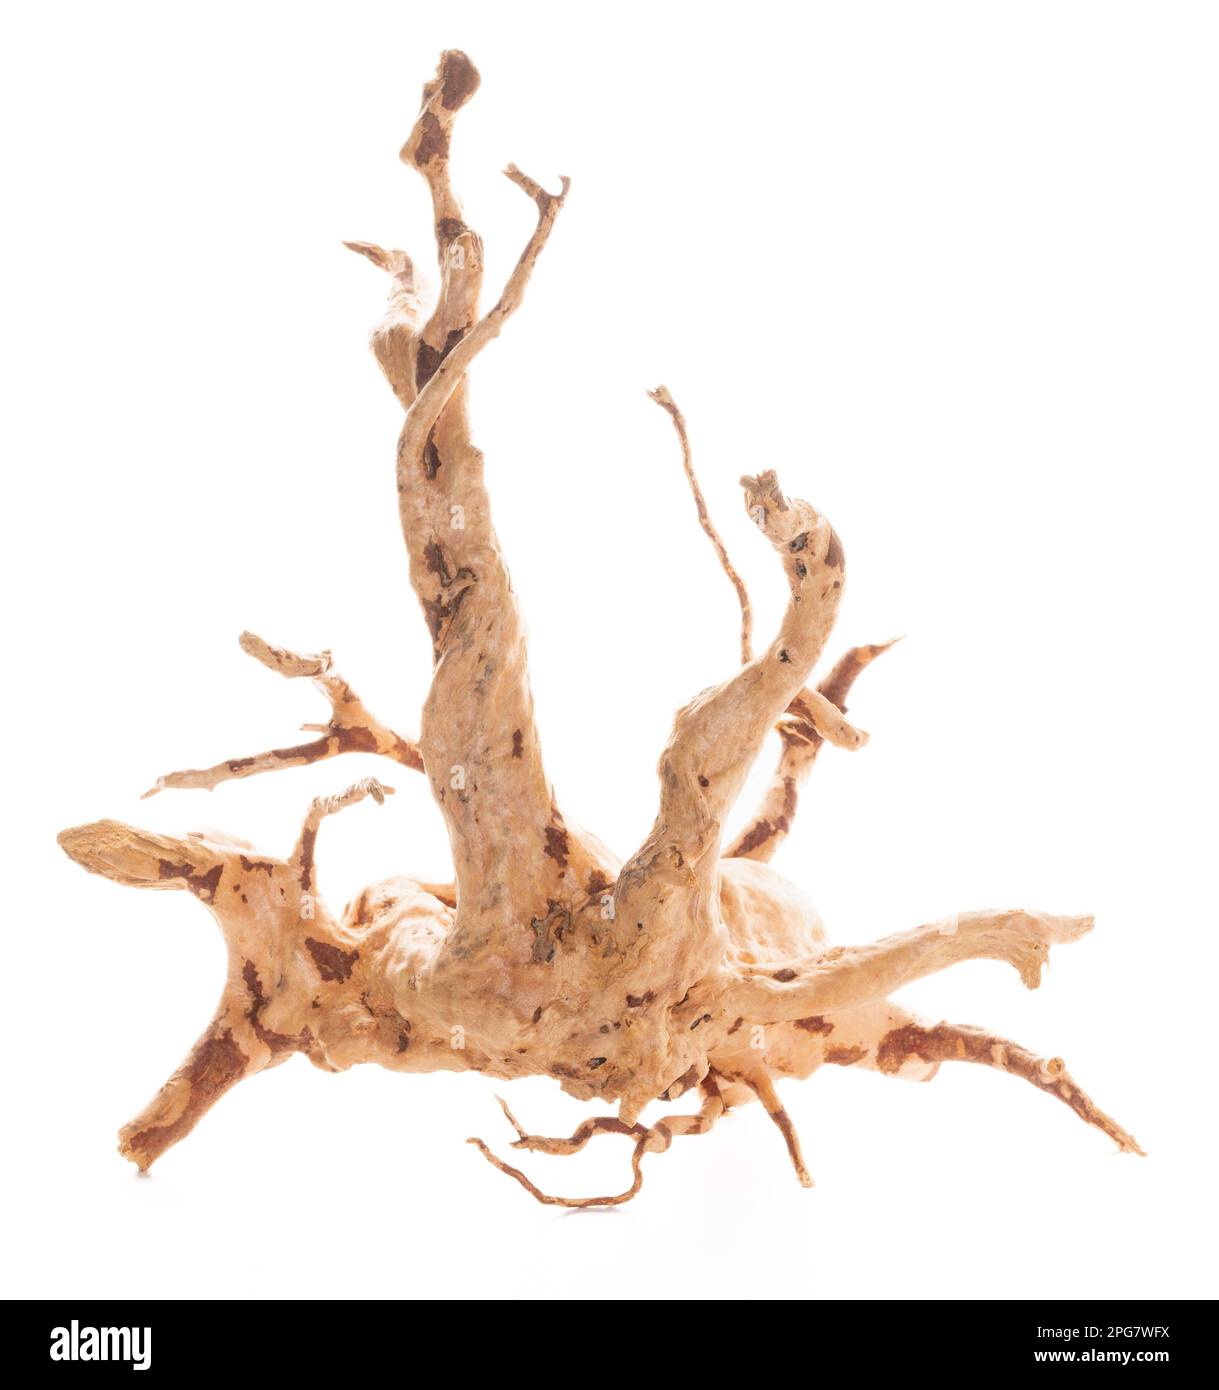 Red moor driftwood for aquarium aquascaping design isolated on the white background. Stock Photo